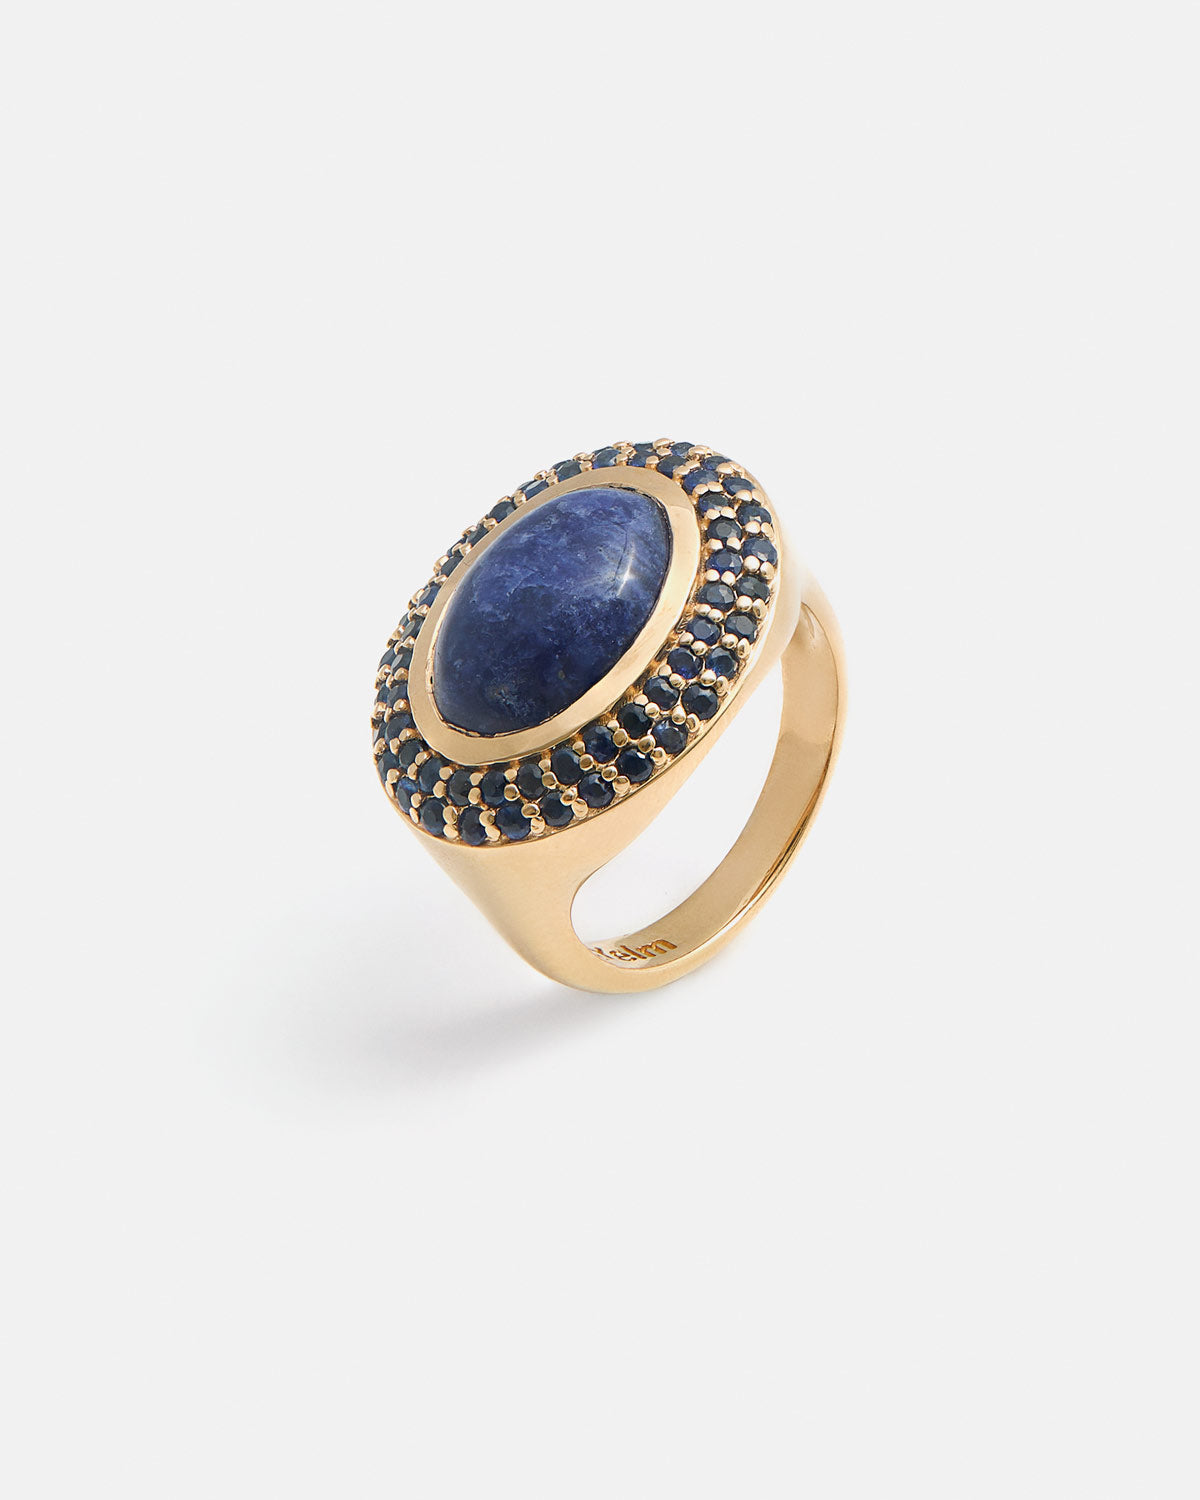 Bane Ring in 14k Yellow Gold with Lapis and Sapphires